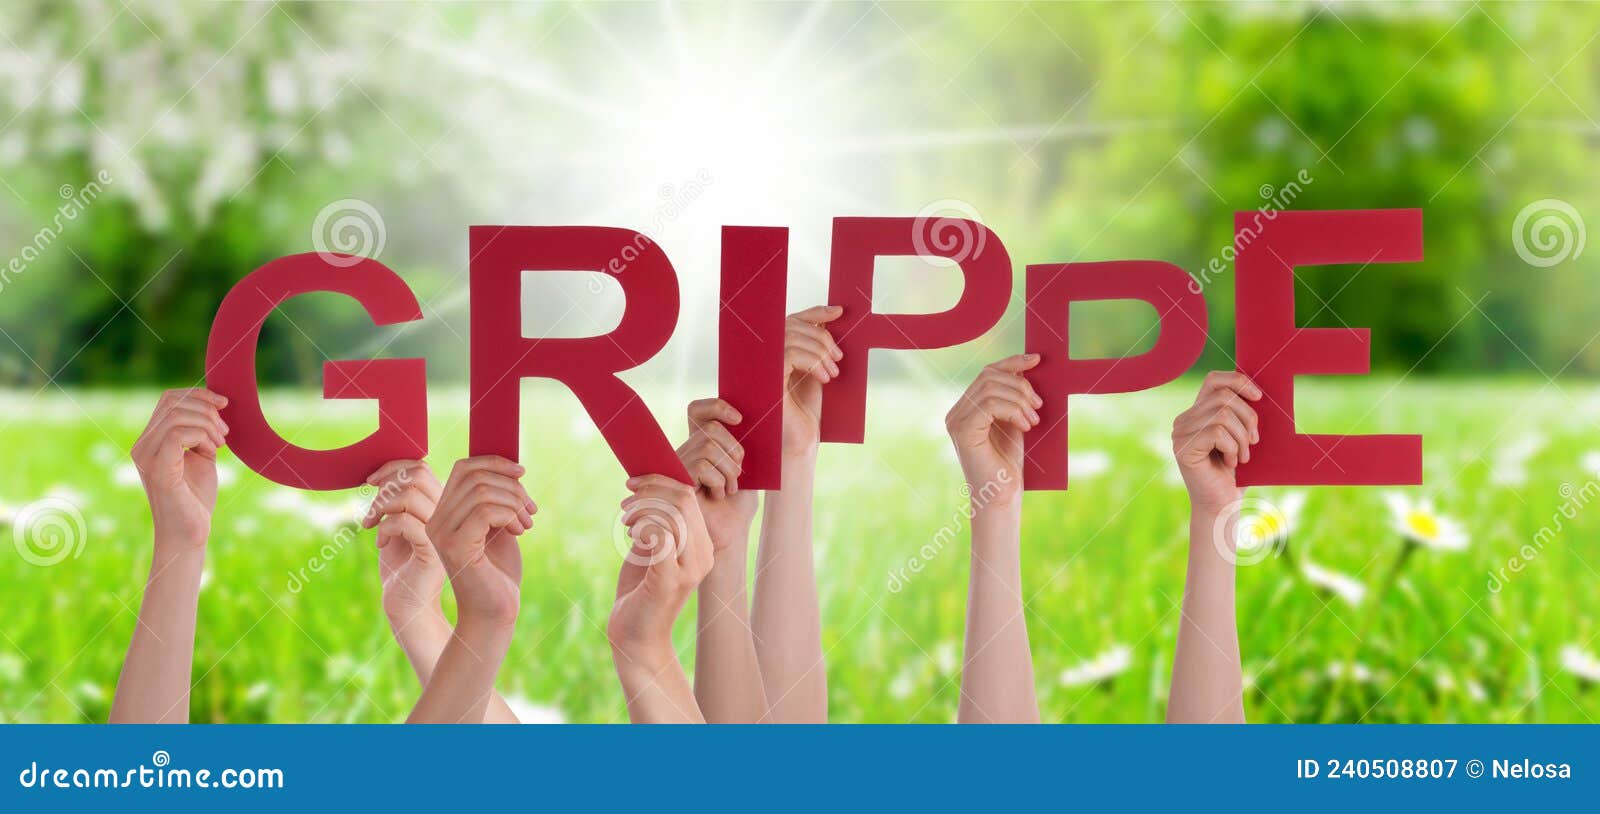 people hands holding word grippe means flu, grass meadow